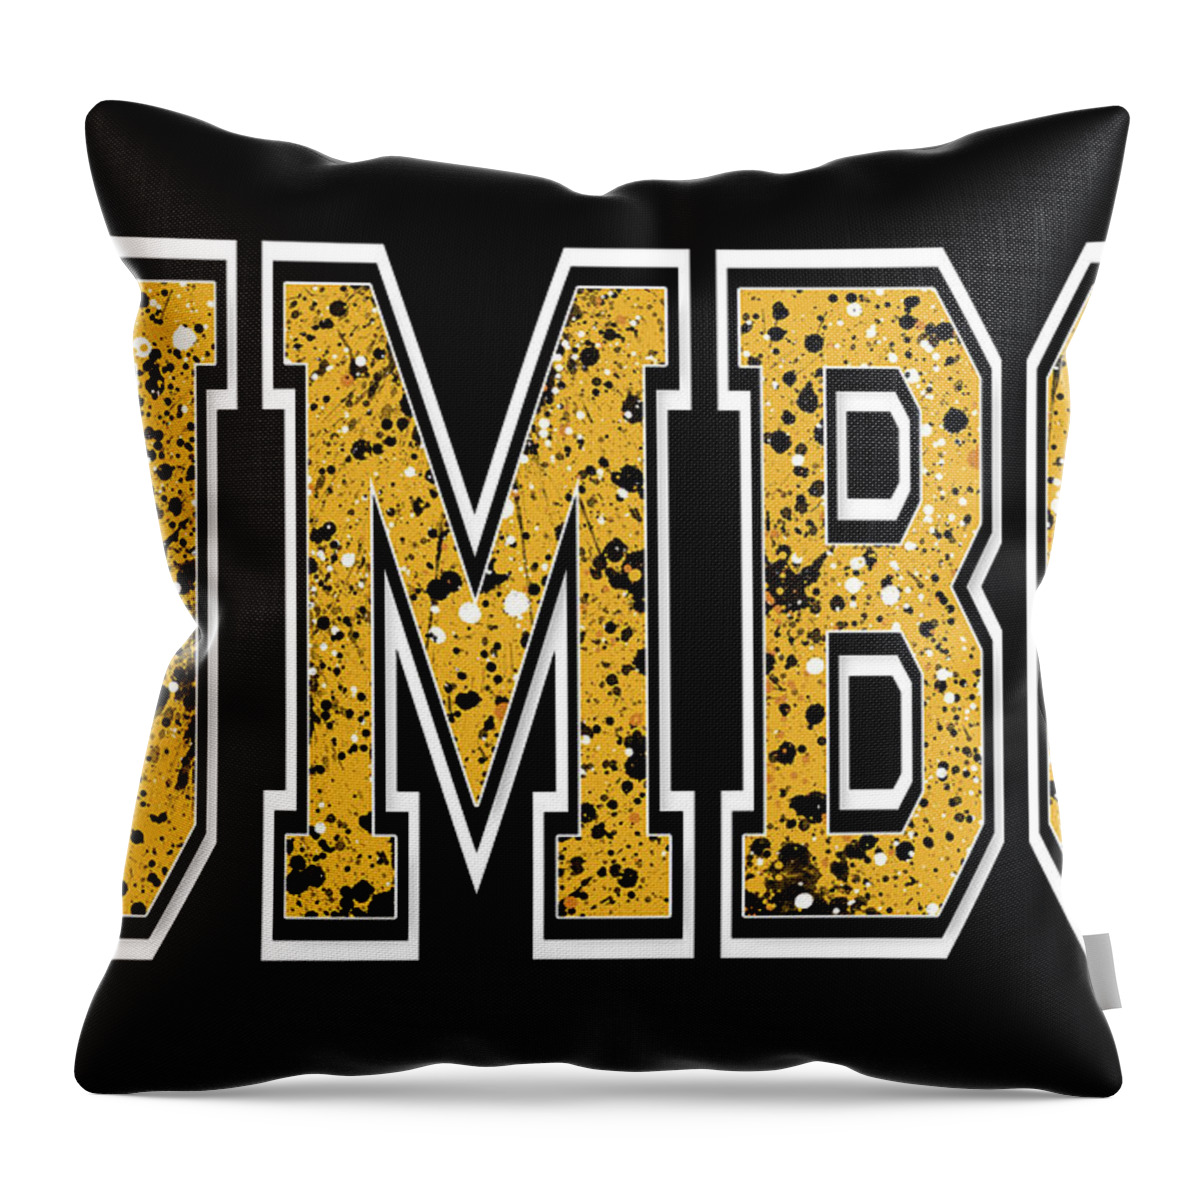 Umbc Throw Pillow featuring the digital art UMBC - University of Baltimore County - Black by Stephen Younts